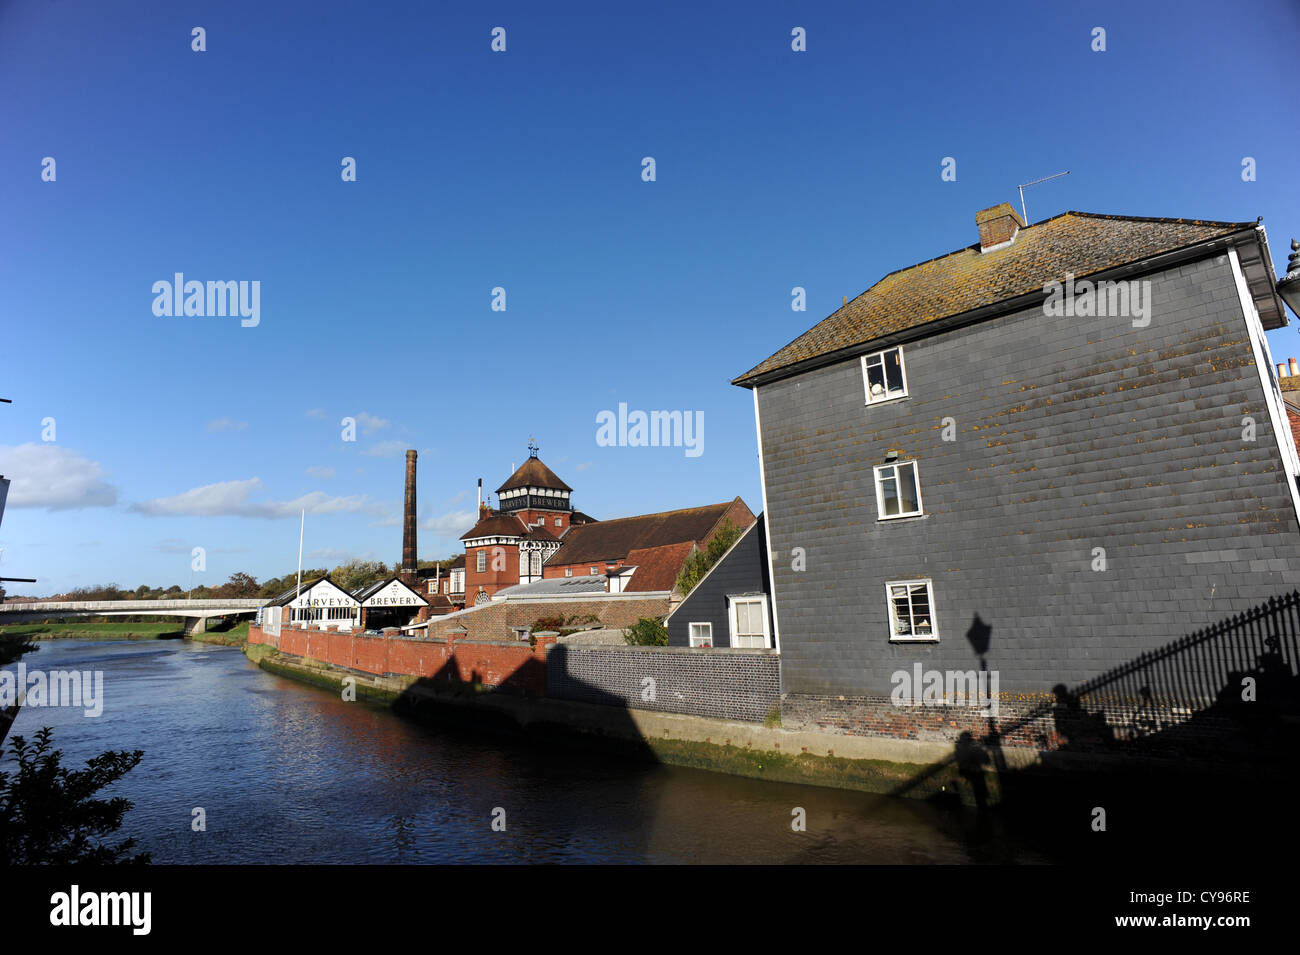 Harvey's Brewery next to the River Ouse in Lewes Stock Photo